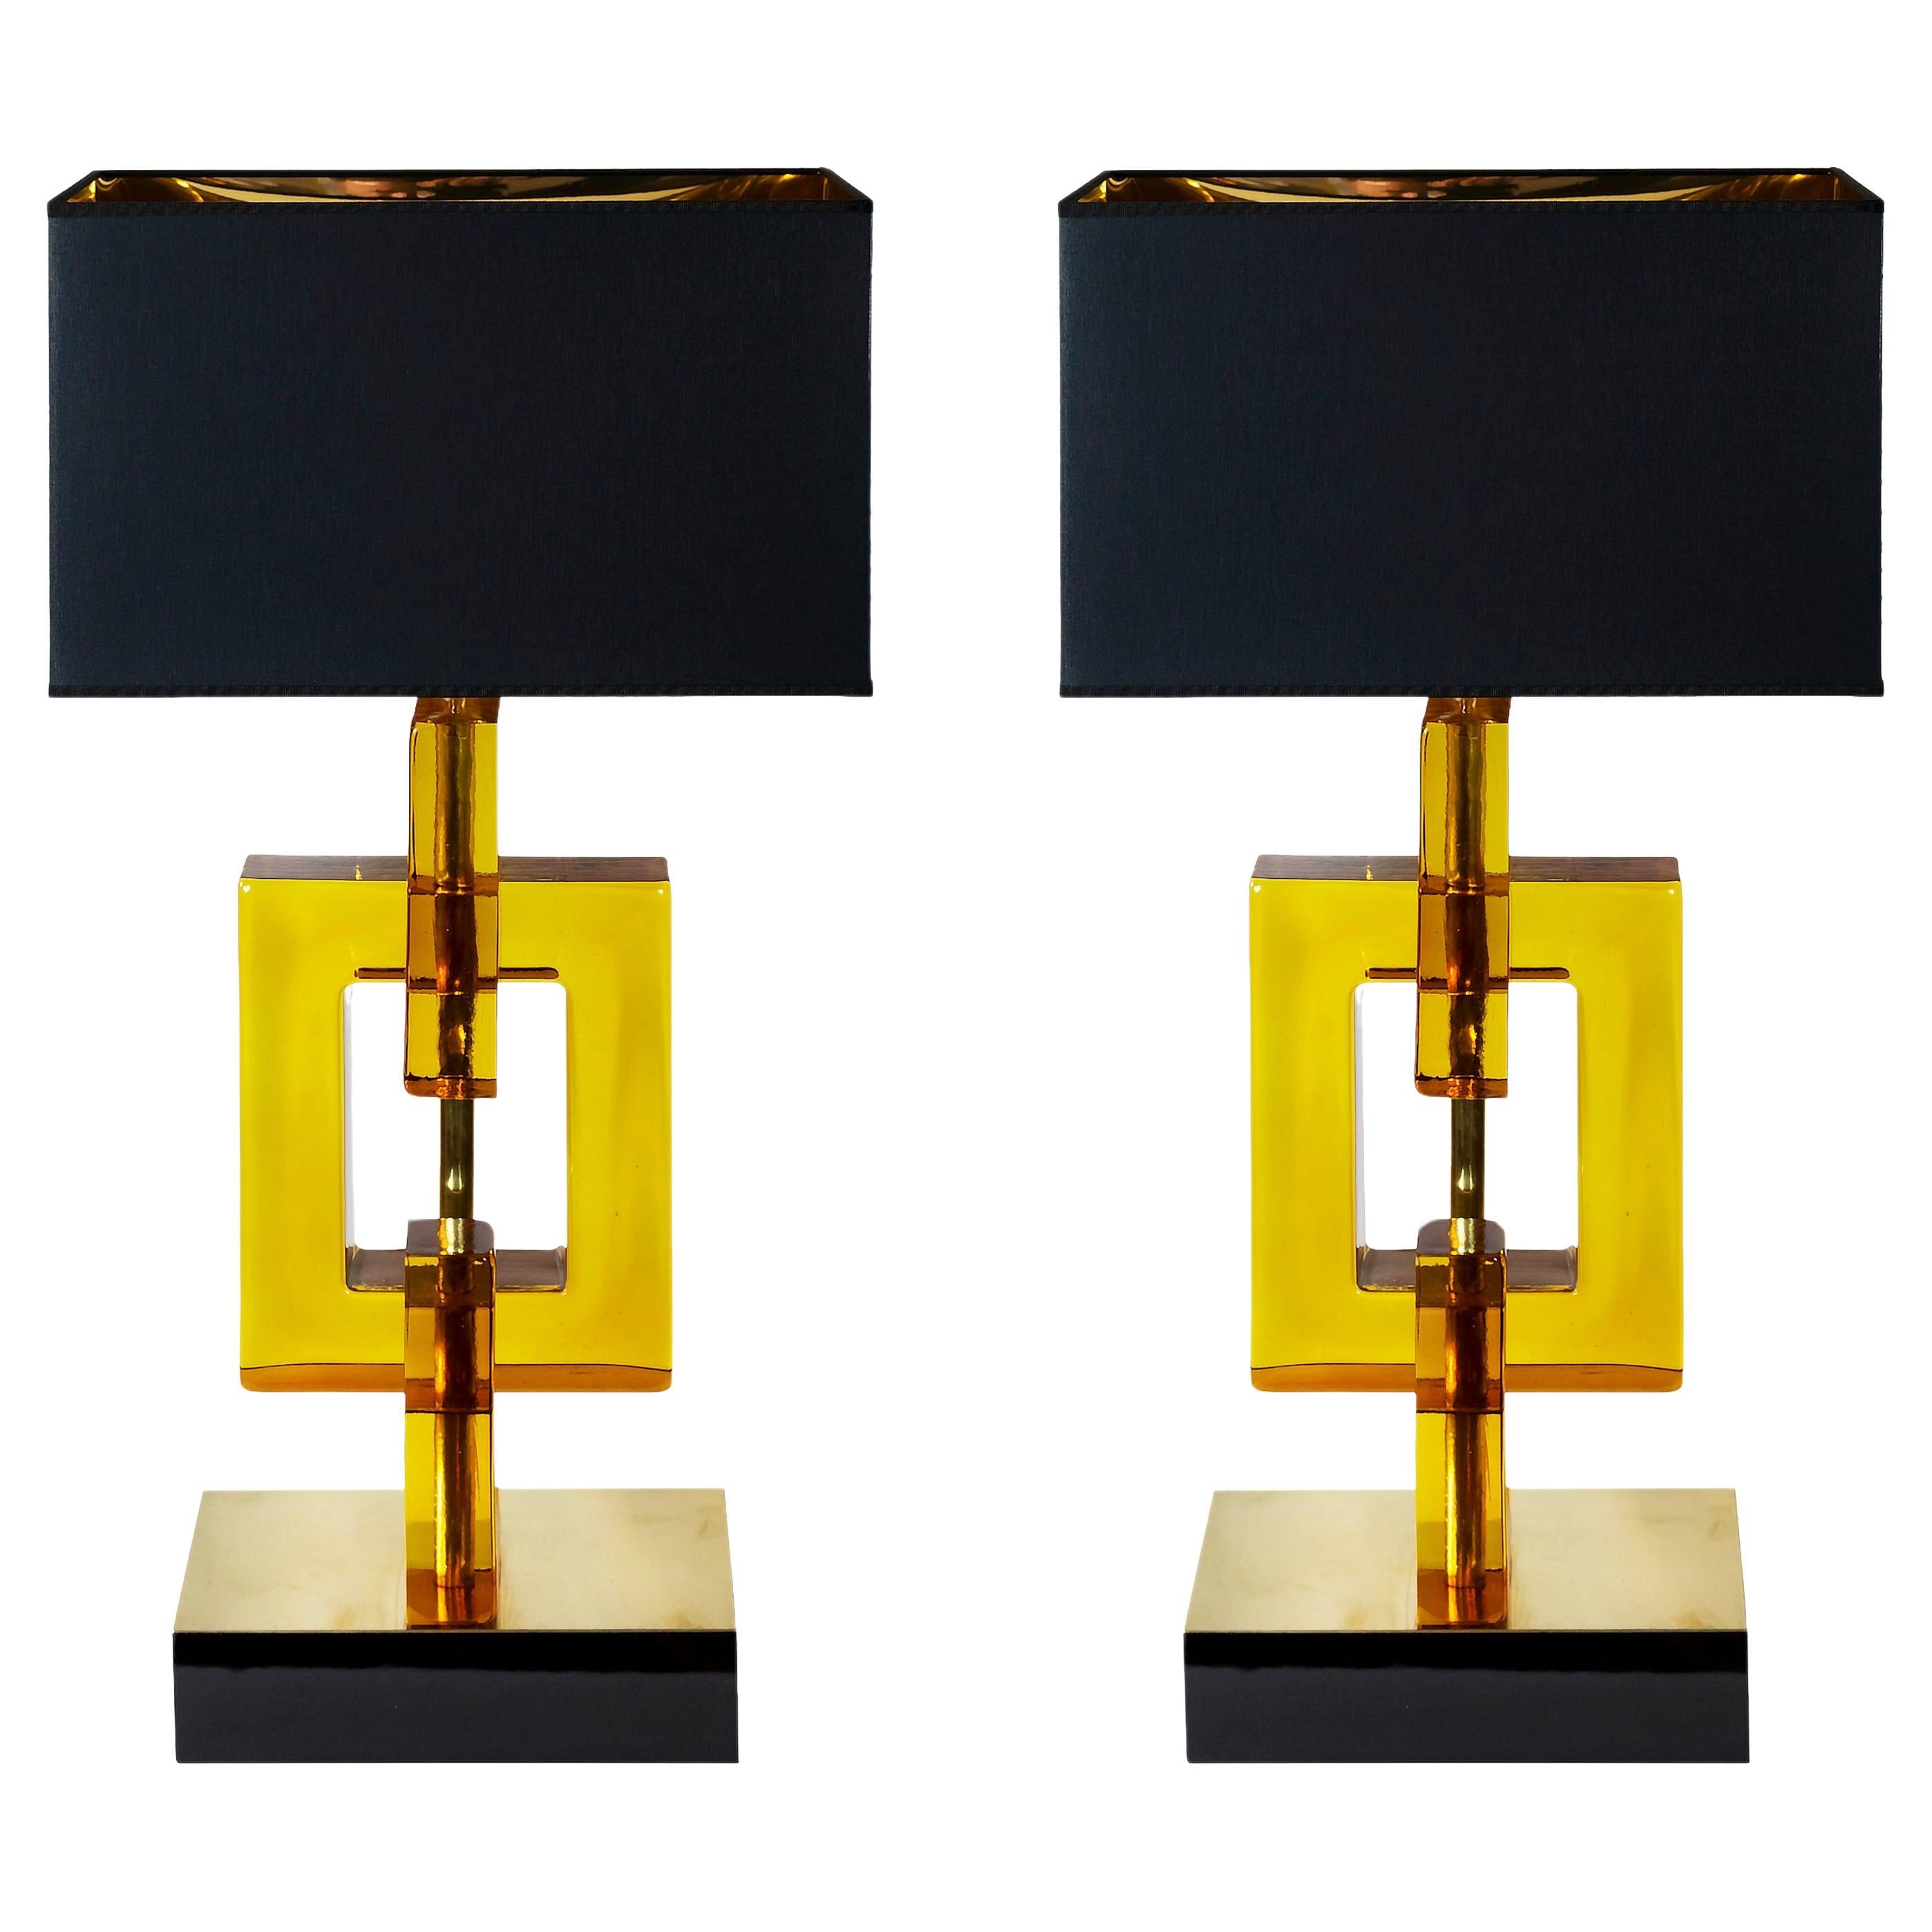 Pair of large Art Deco style Italian table lamps.
The base is made of thick plywood painted in glossy black and decorated with polished brass sheet on the top. The glass part is handmade ambra/amber Murano glass.
Both lamps are with new made satin